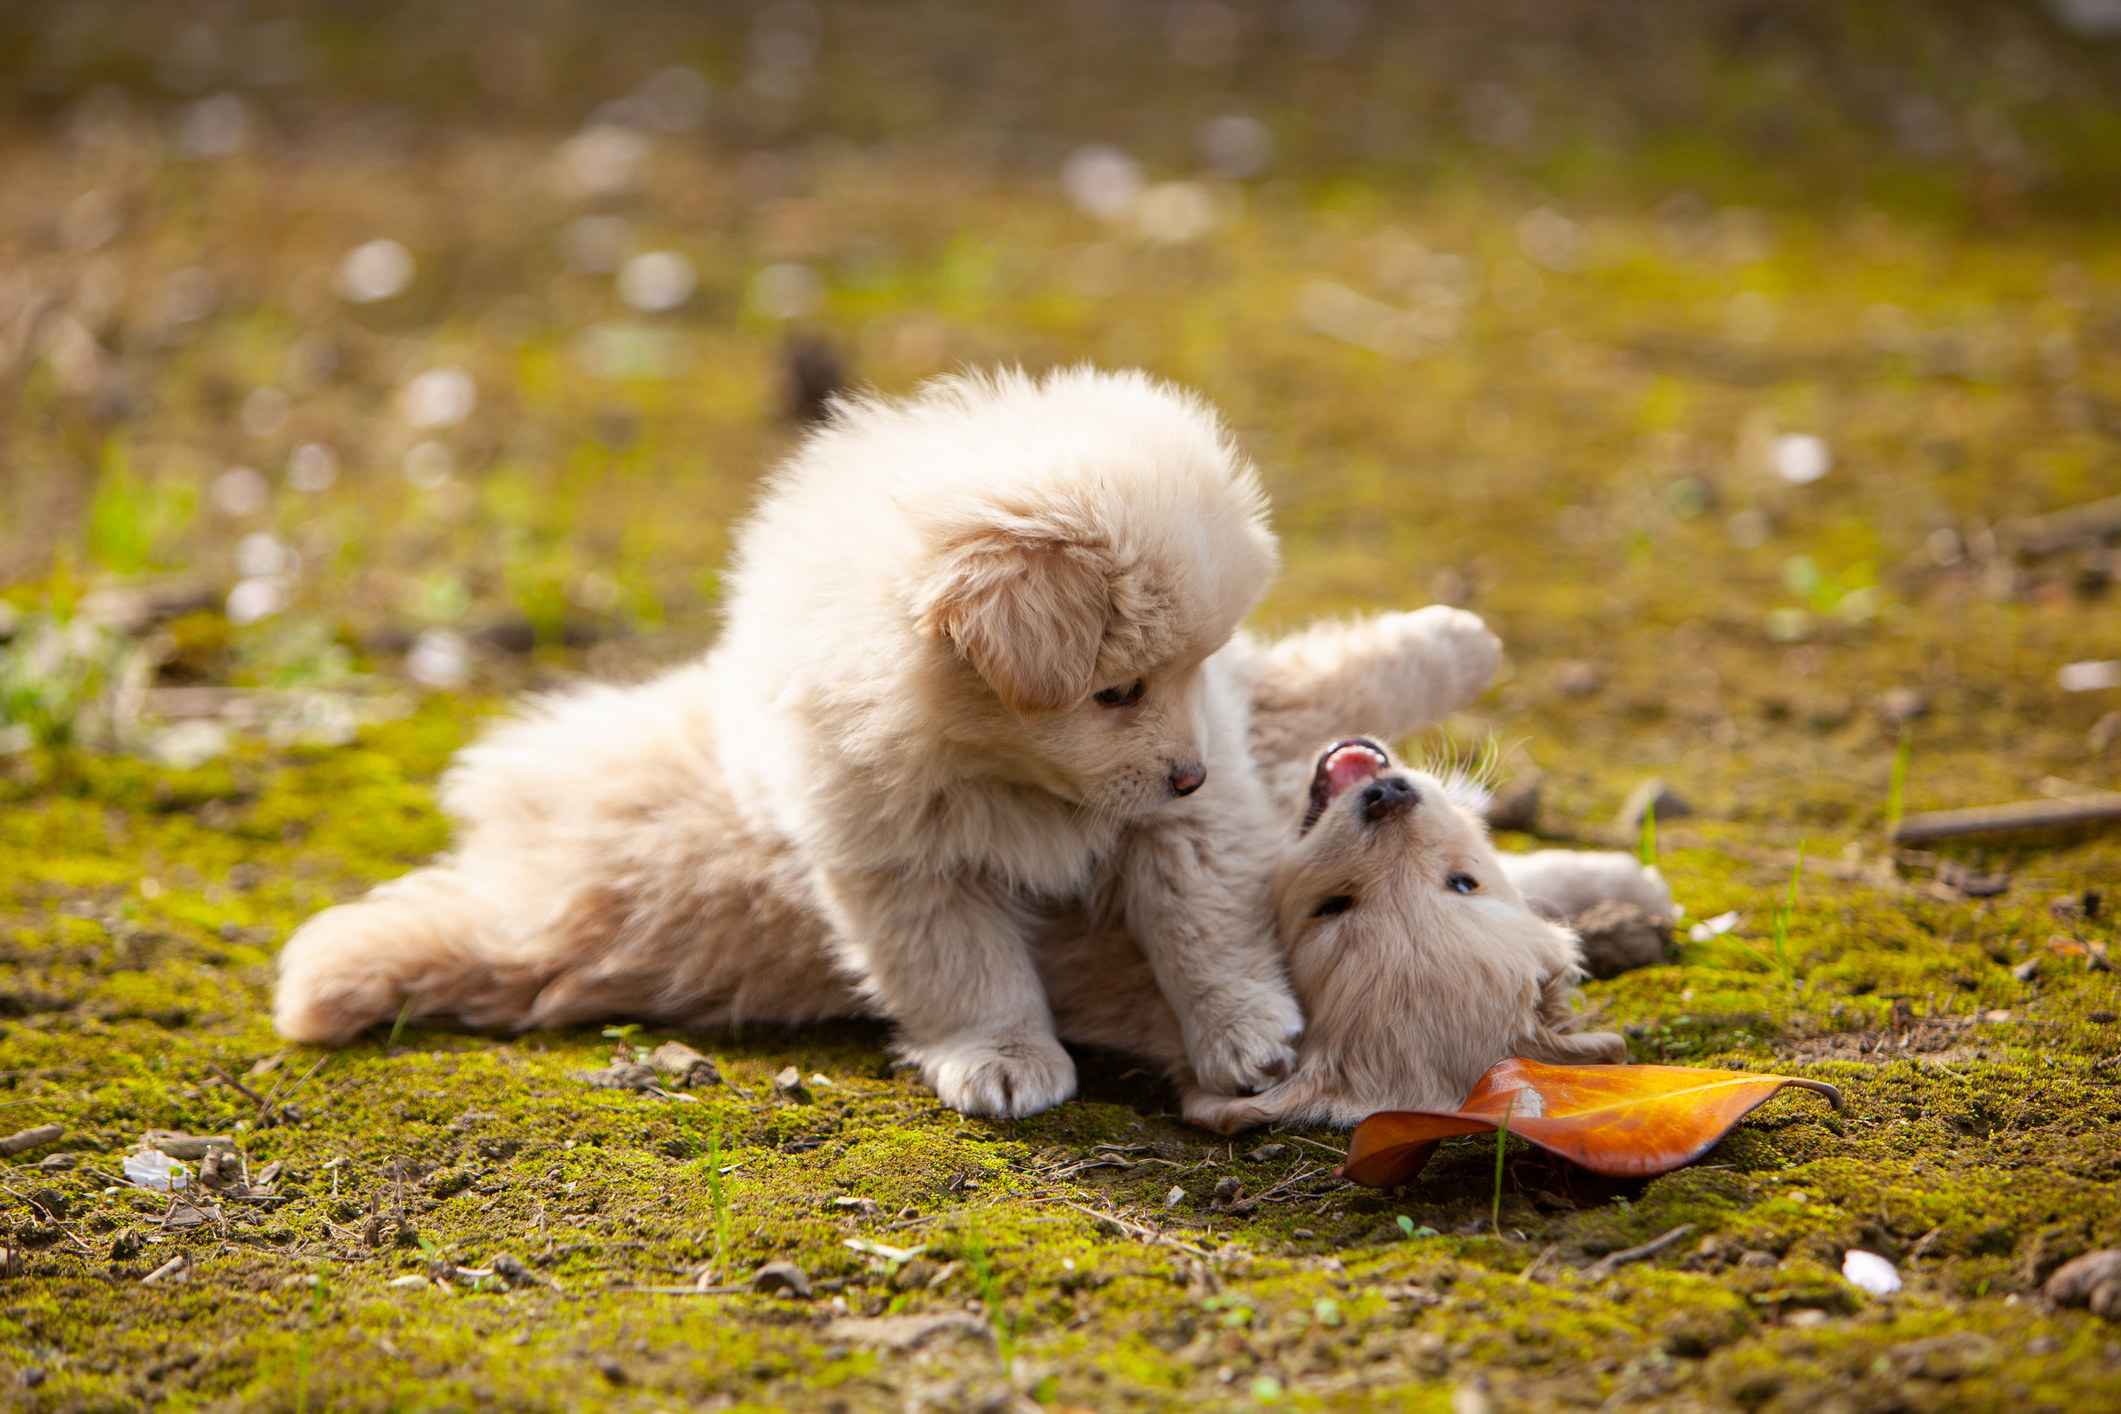 Two puppies play wrestle